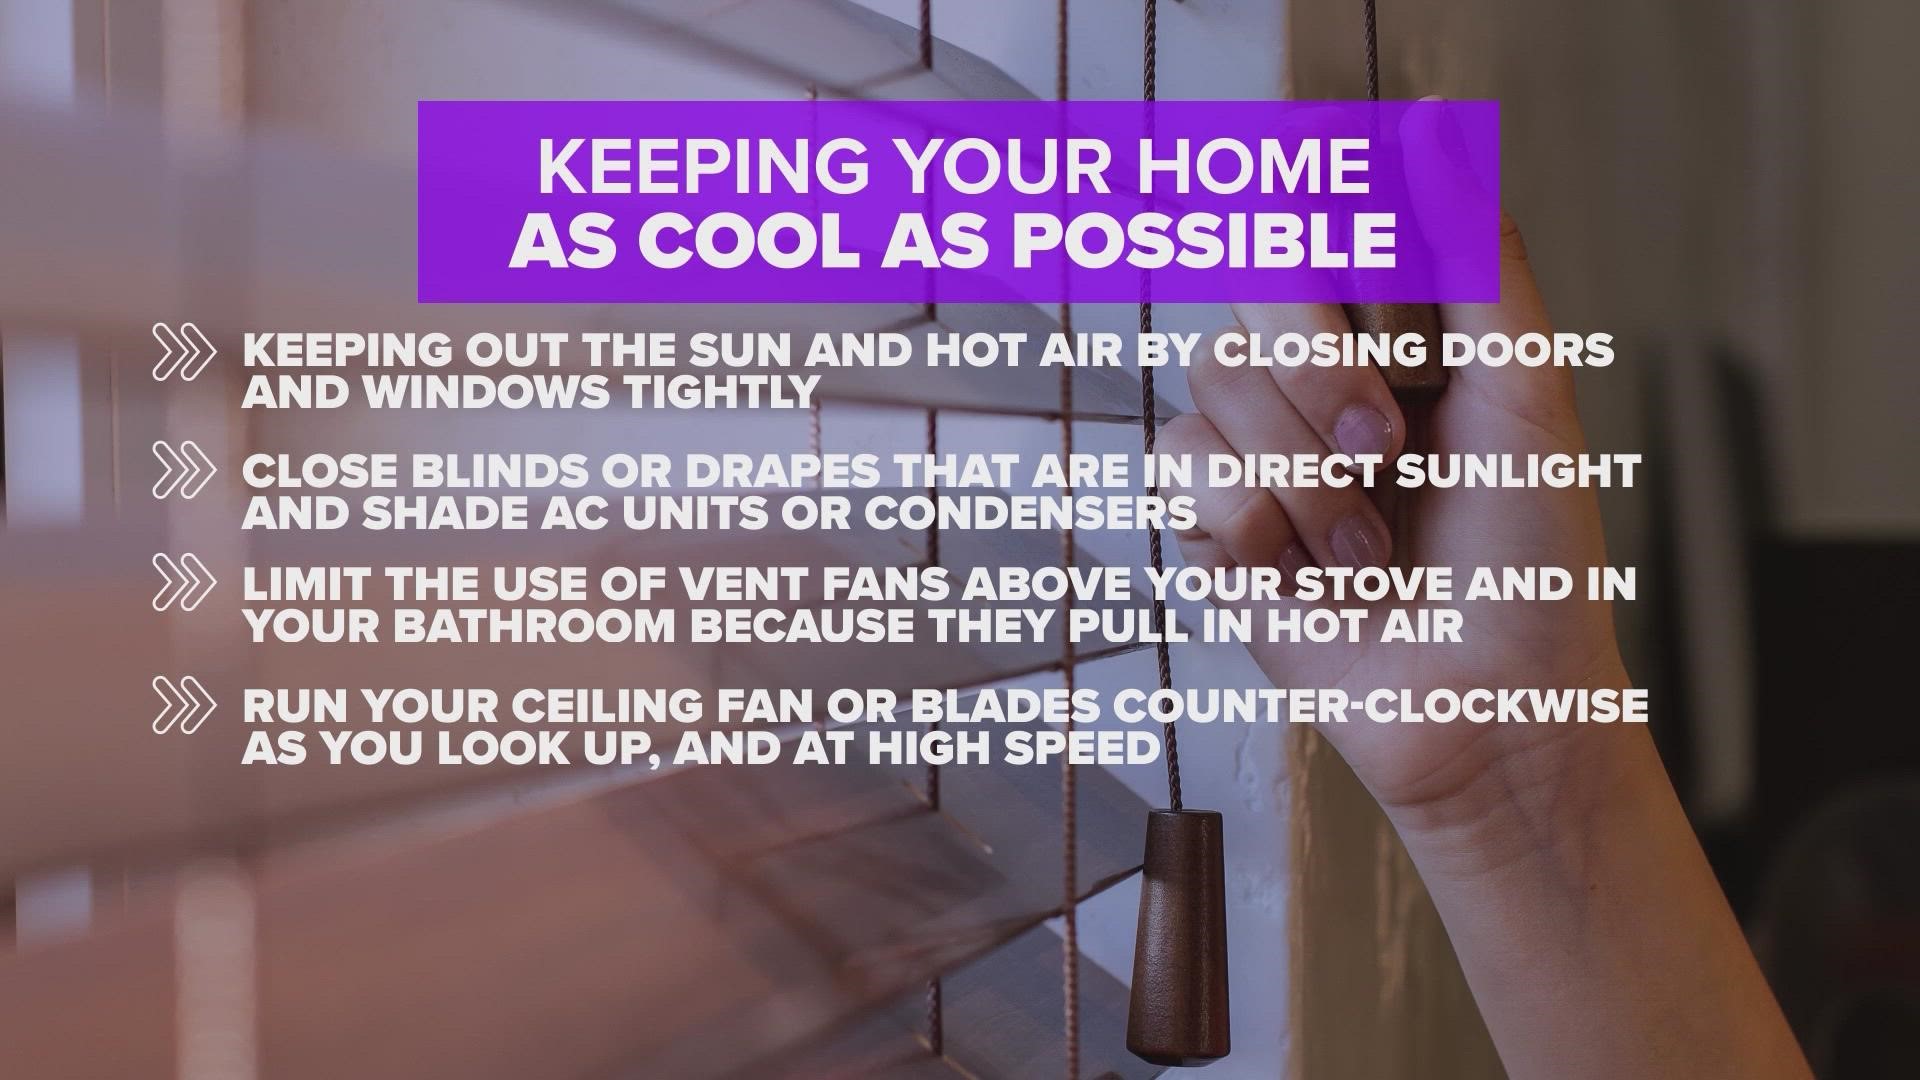 Here are some ways to keep cool inside your home with the temperatures being in the 100s.